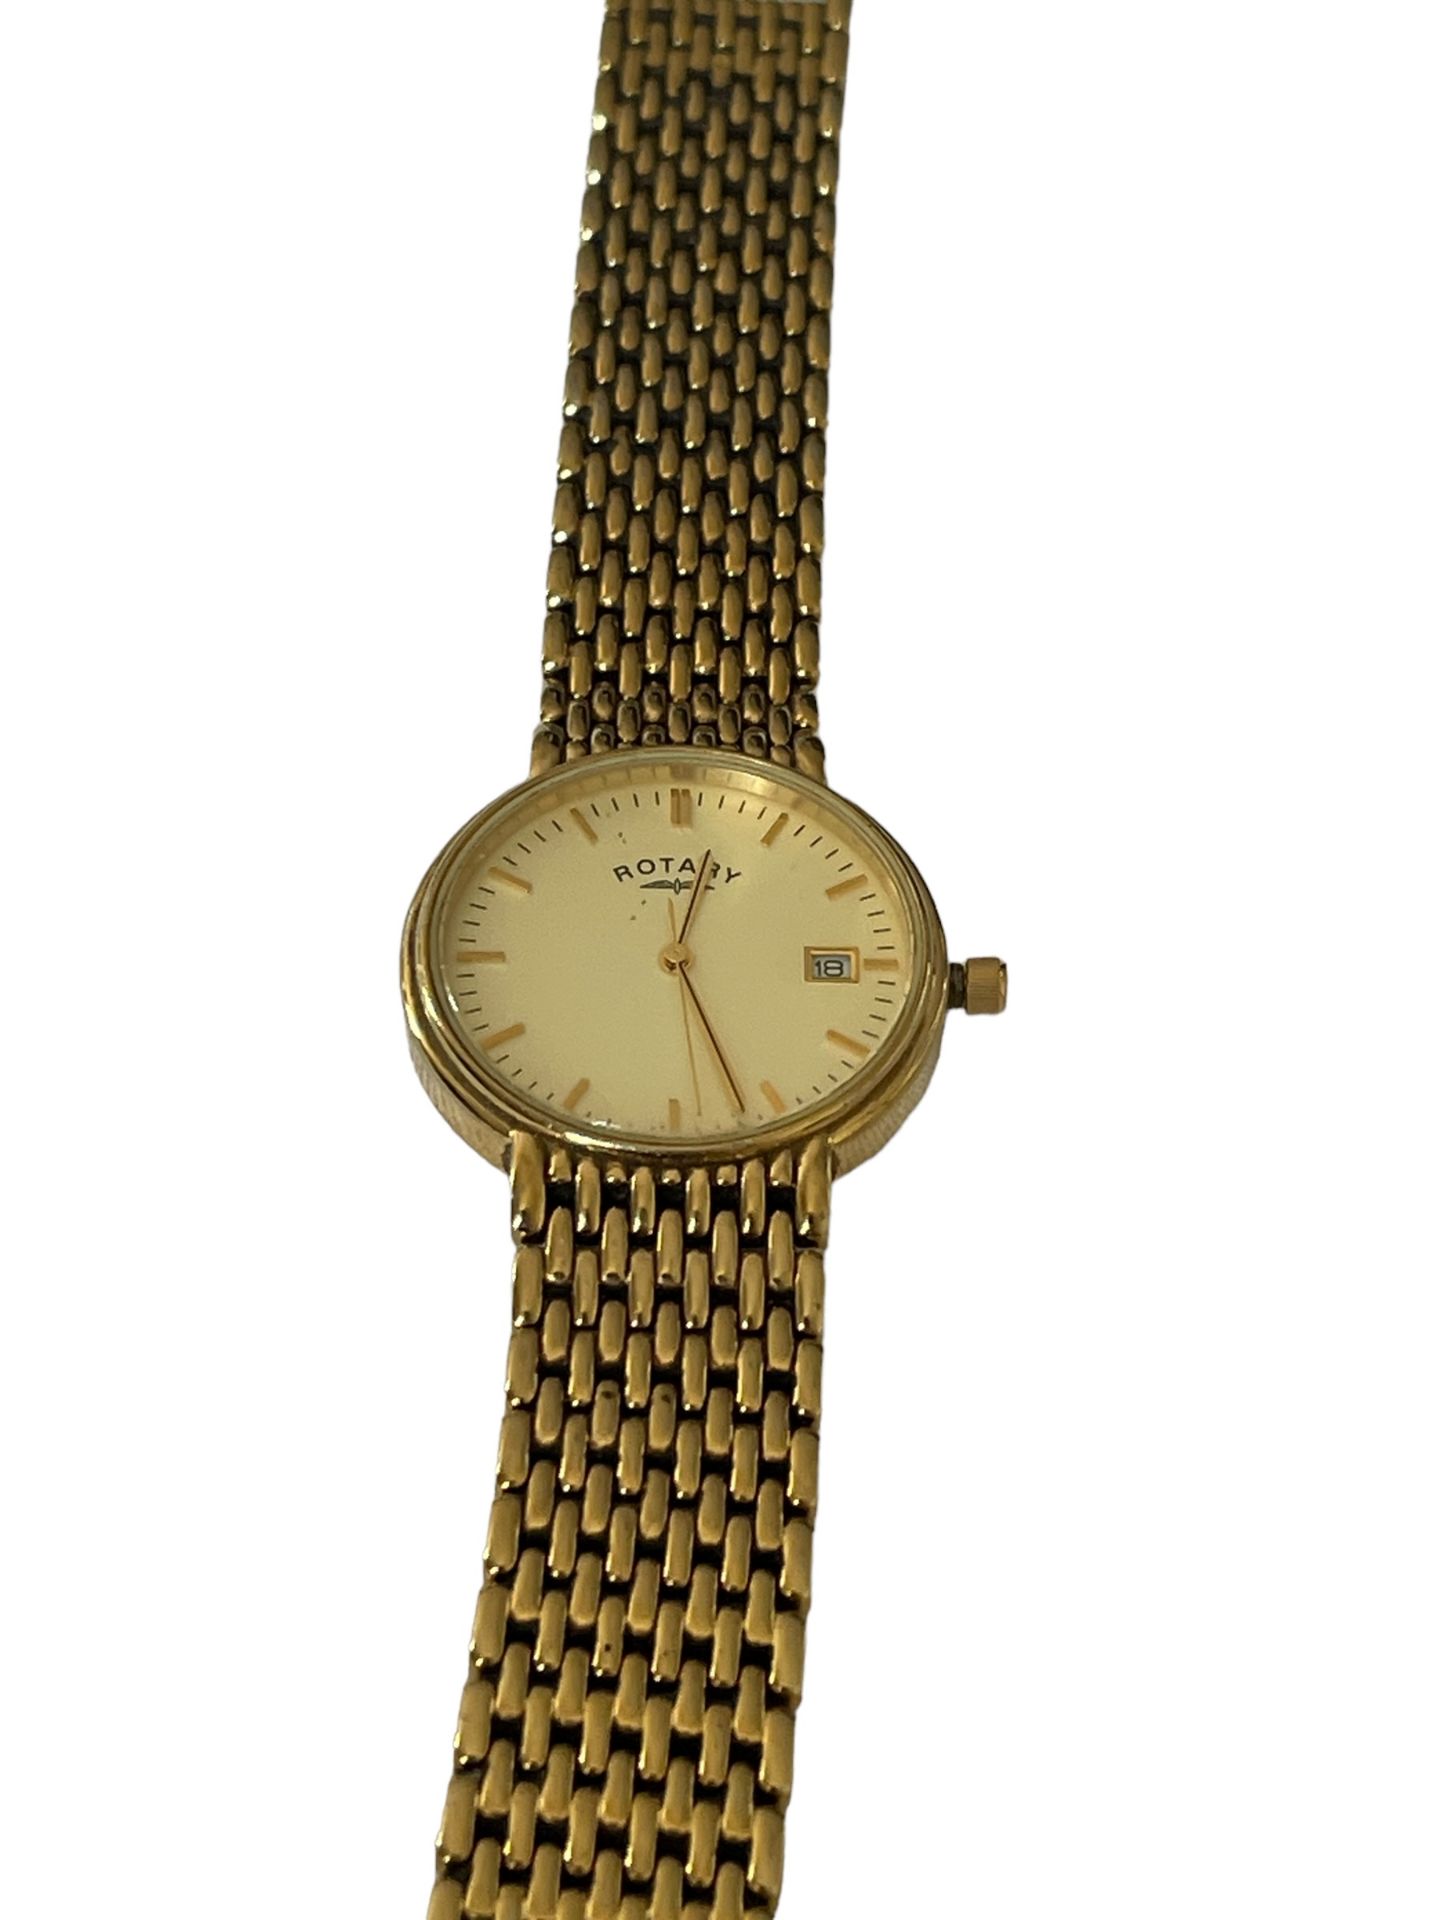 Rotary gents watch gold-plated - Image 3 of 4